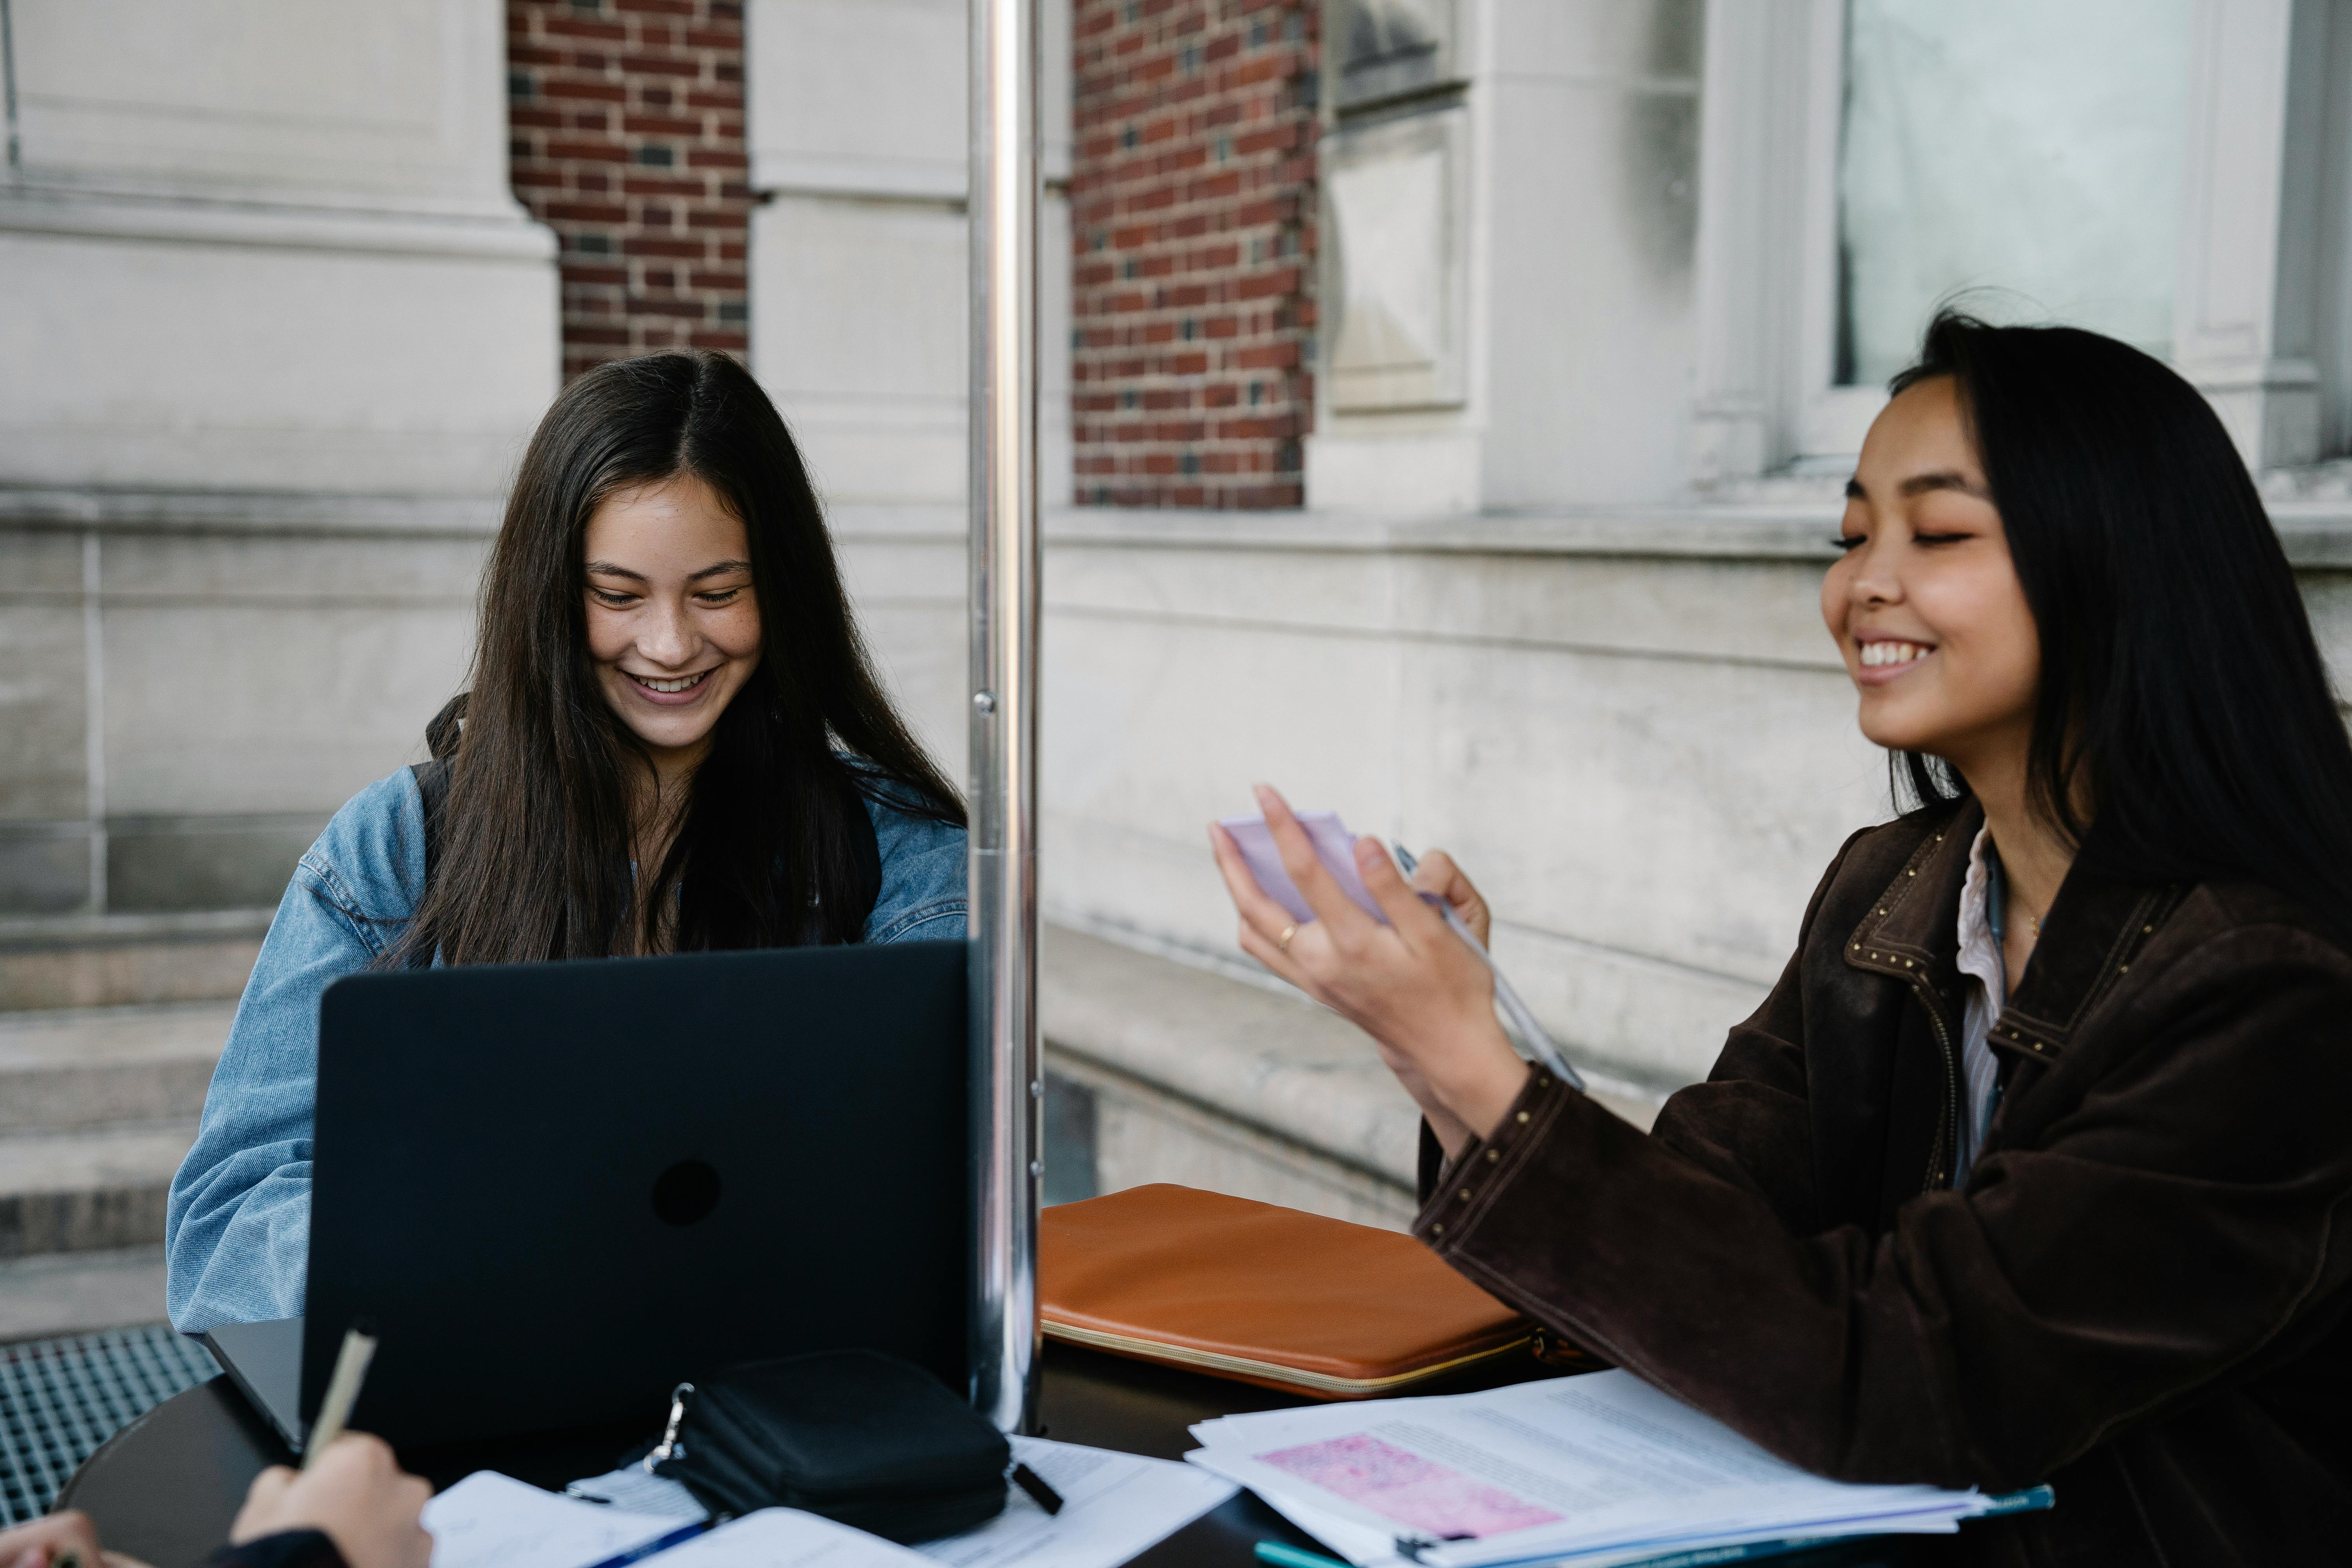 Two young women studying | Source: Pexels